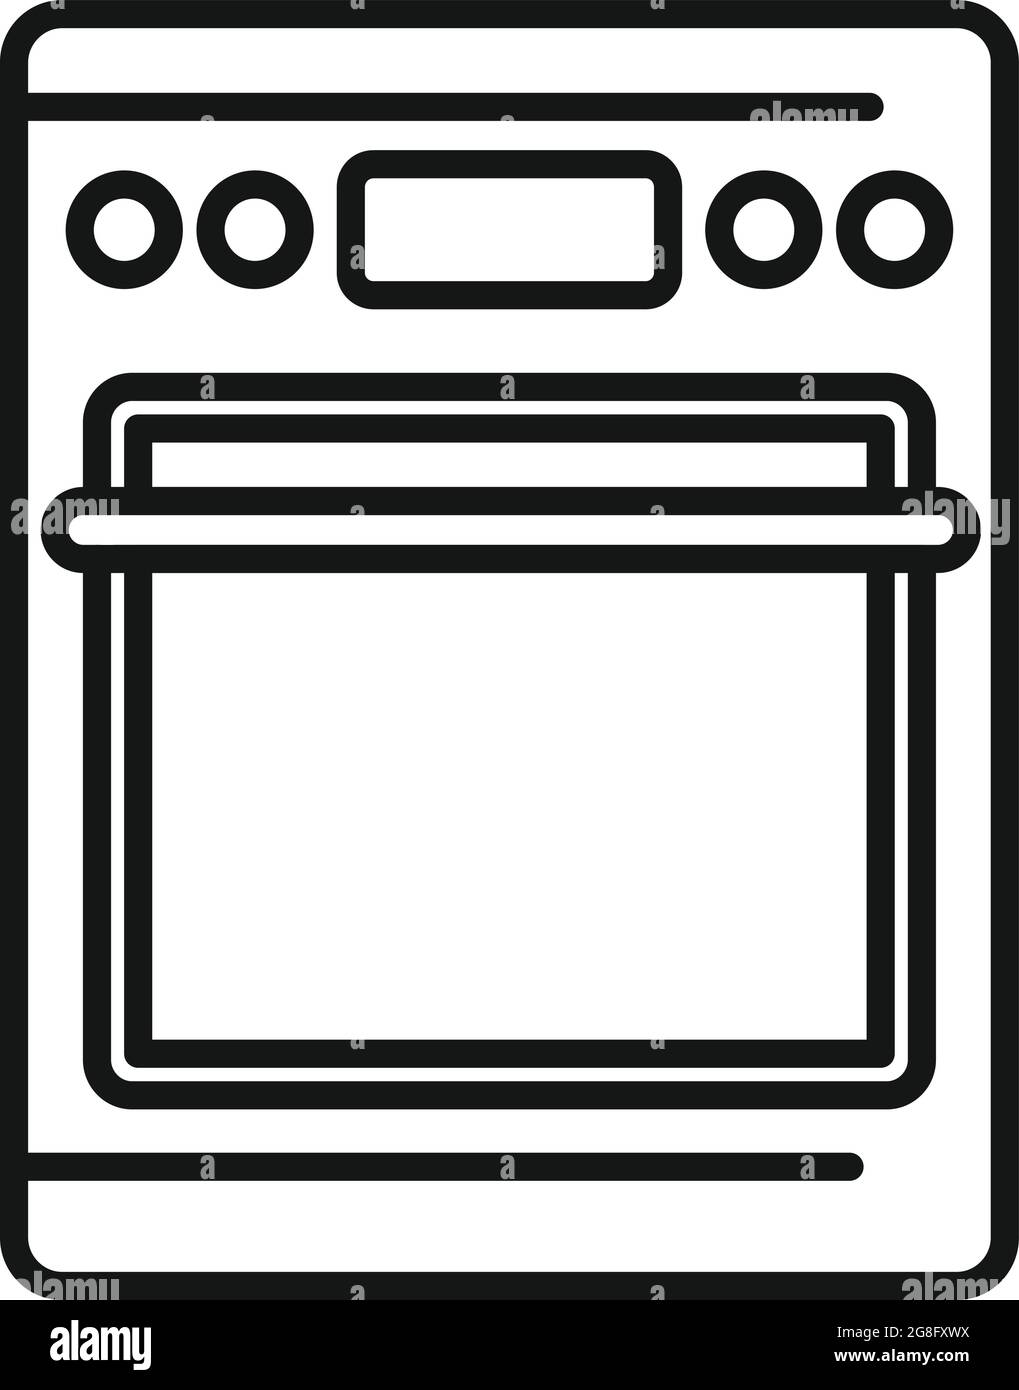 hot oven clipart